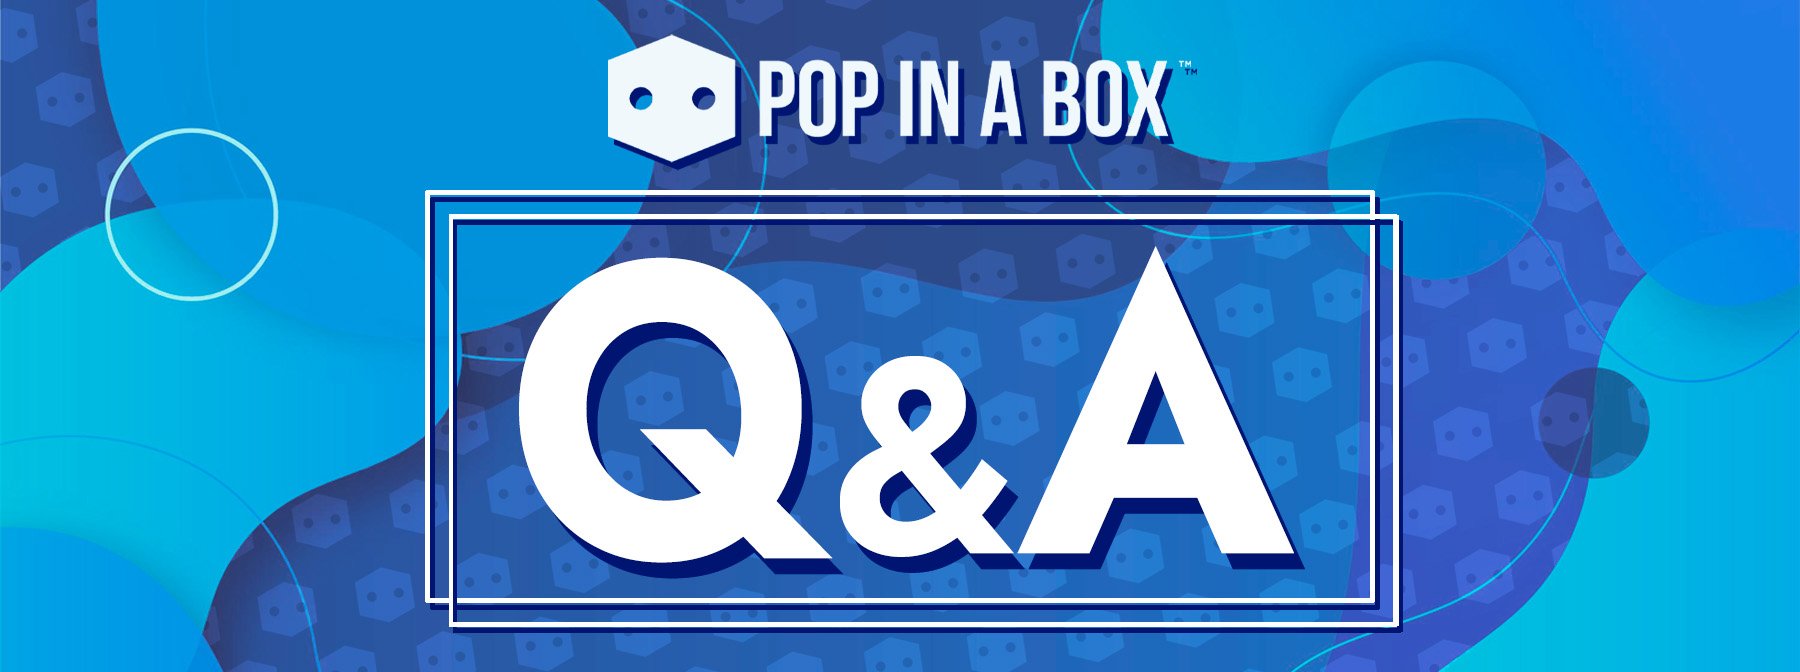 Talking All Things Funko-Related With Virtual.Ambvxr